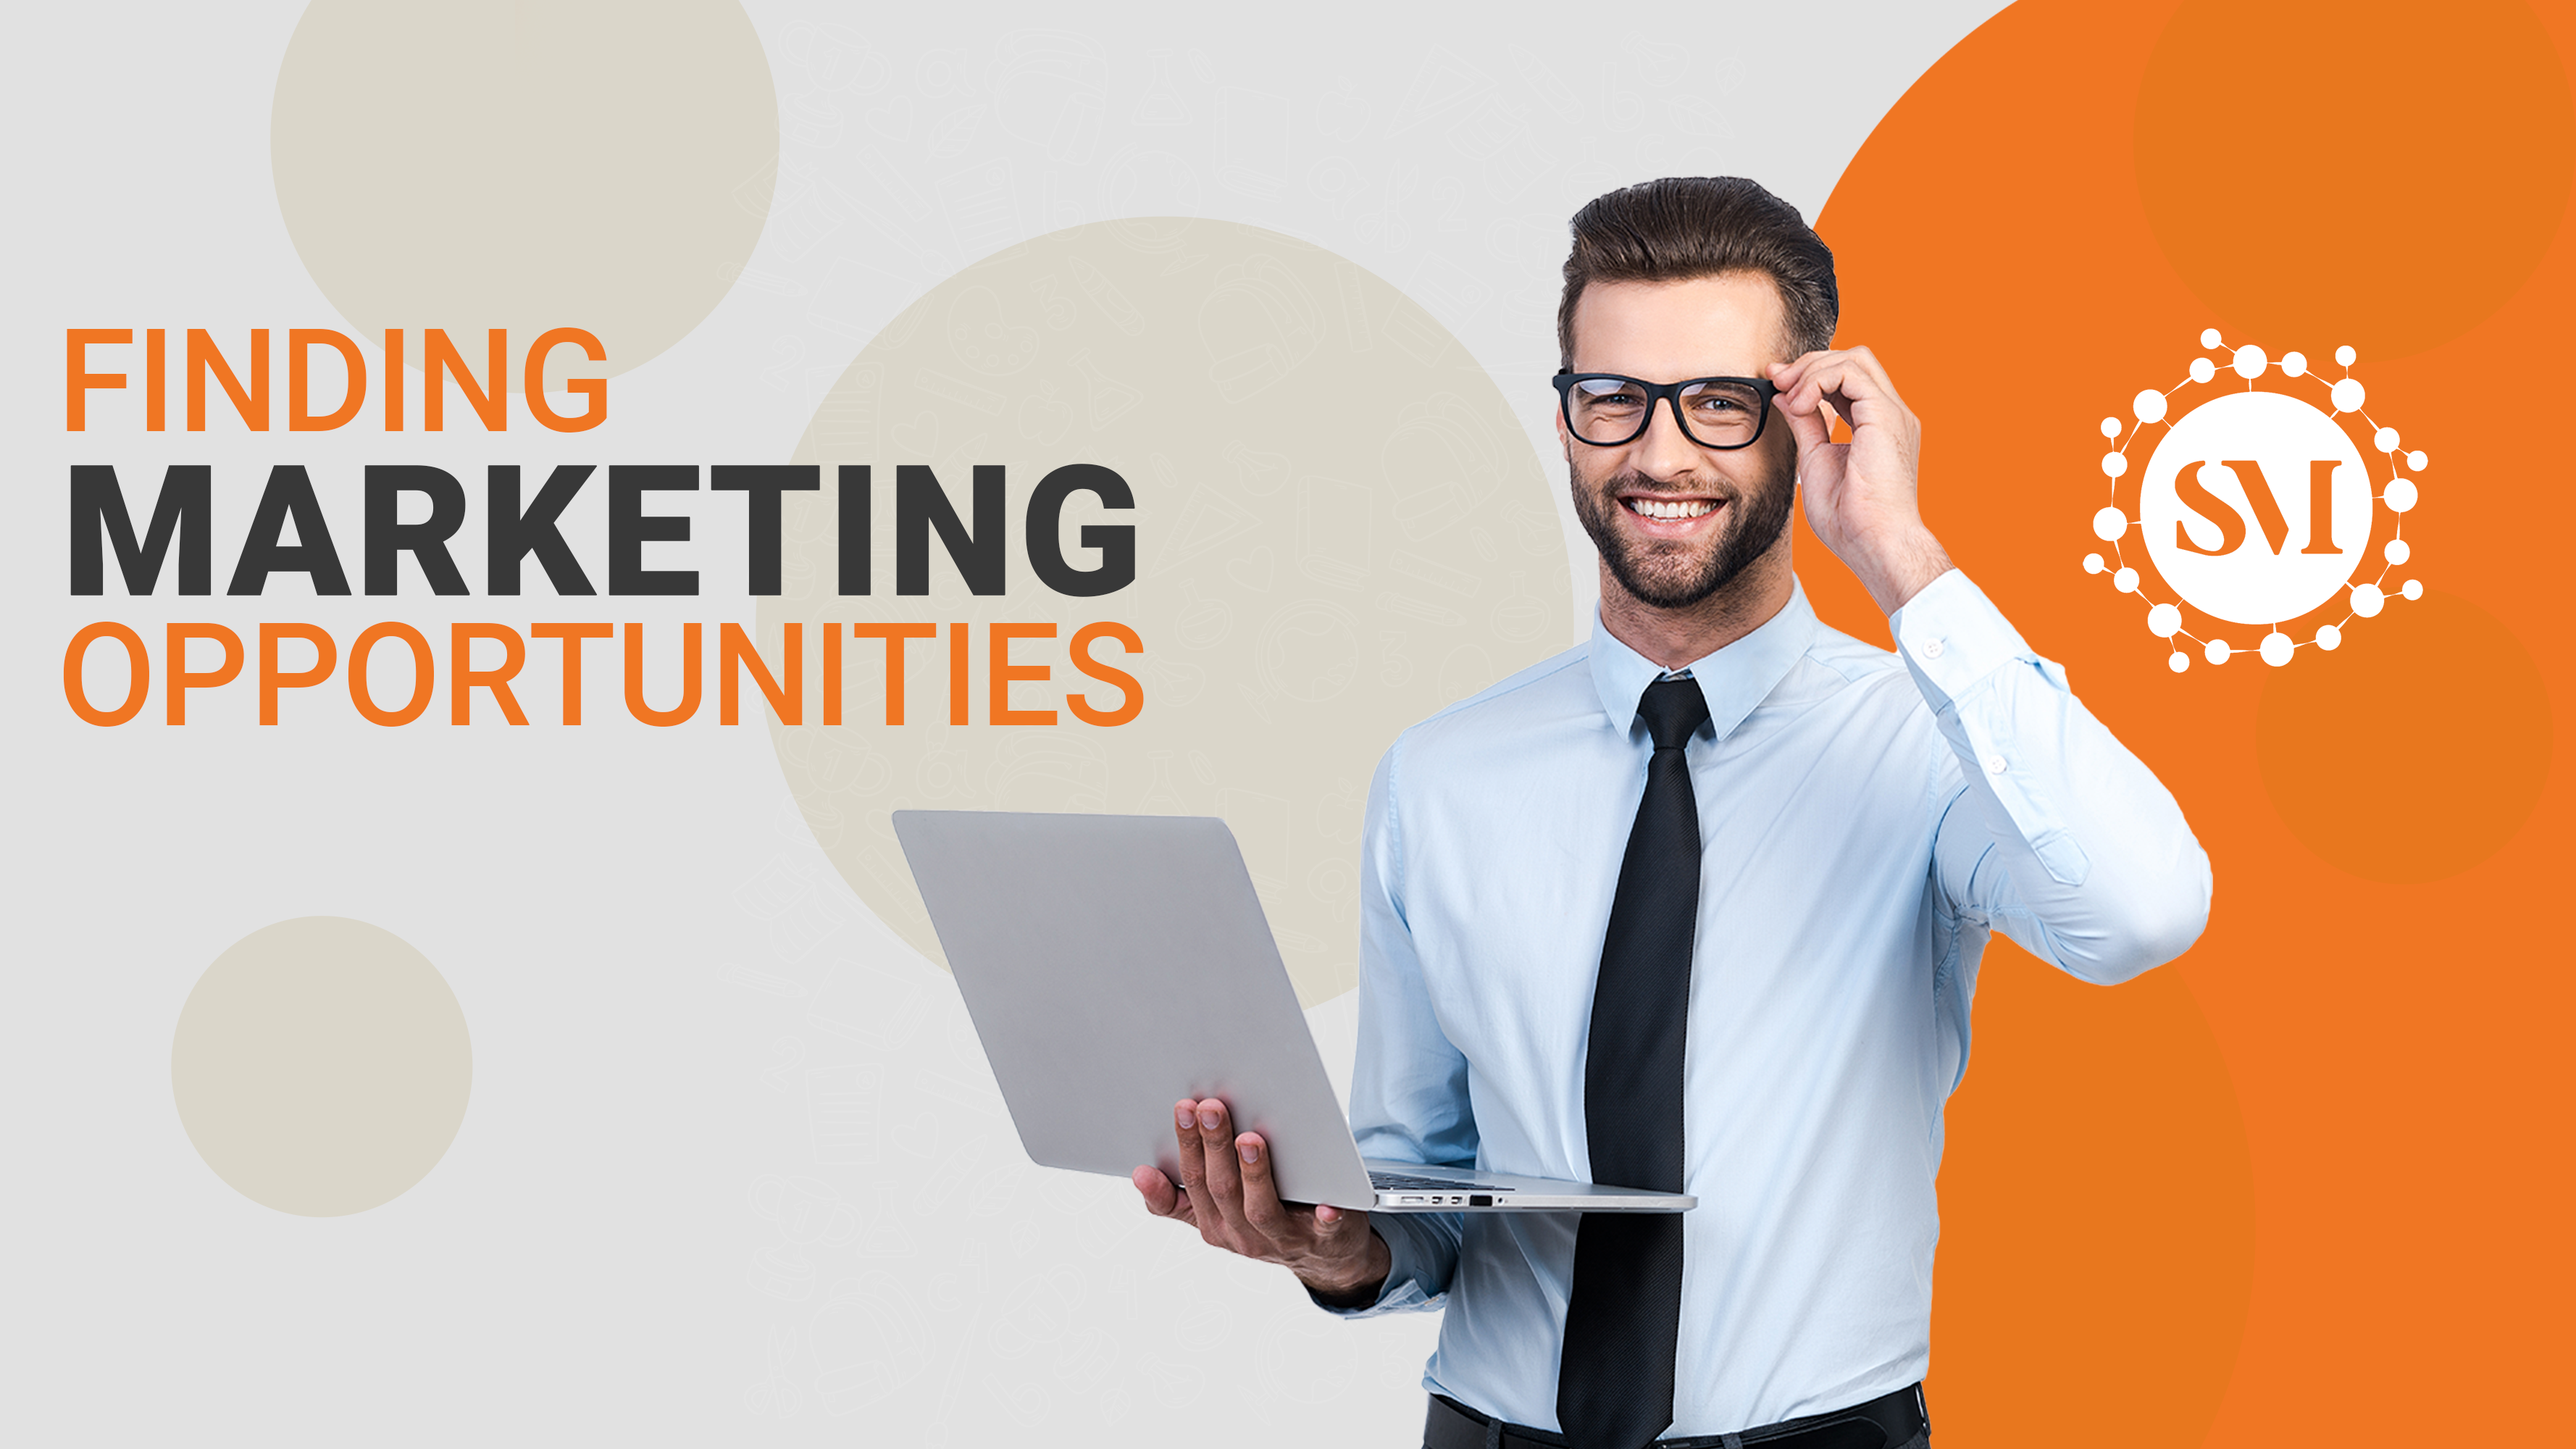 Finding potential marketing opportunities for your business - - Smart Marketing